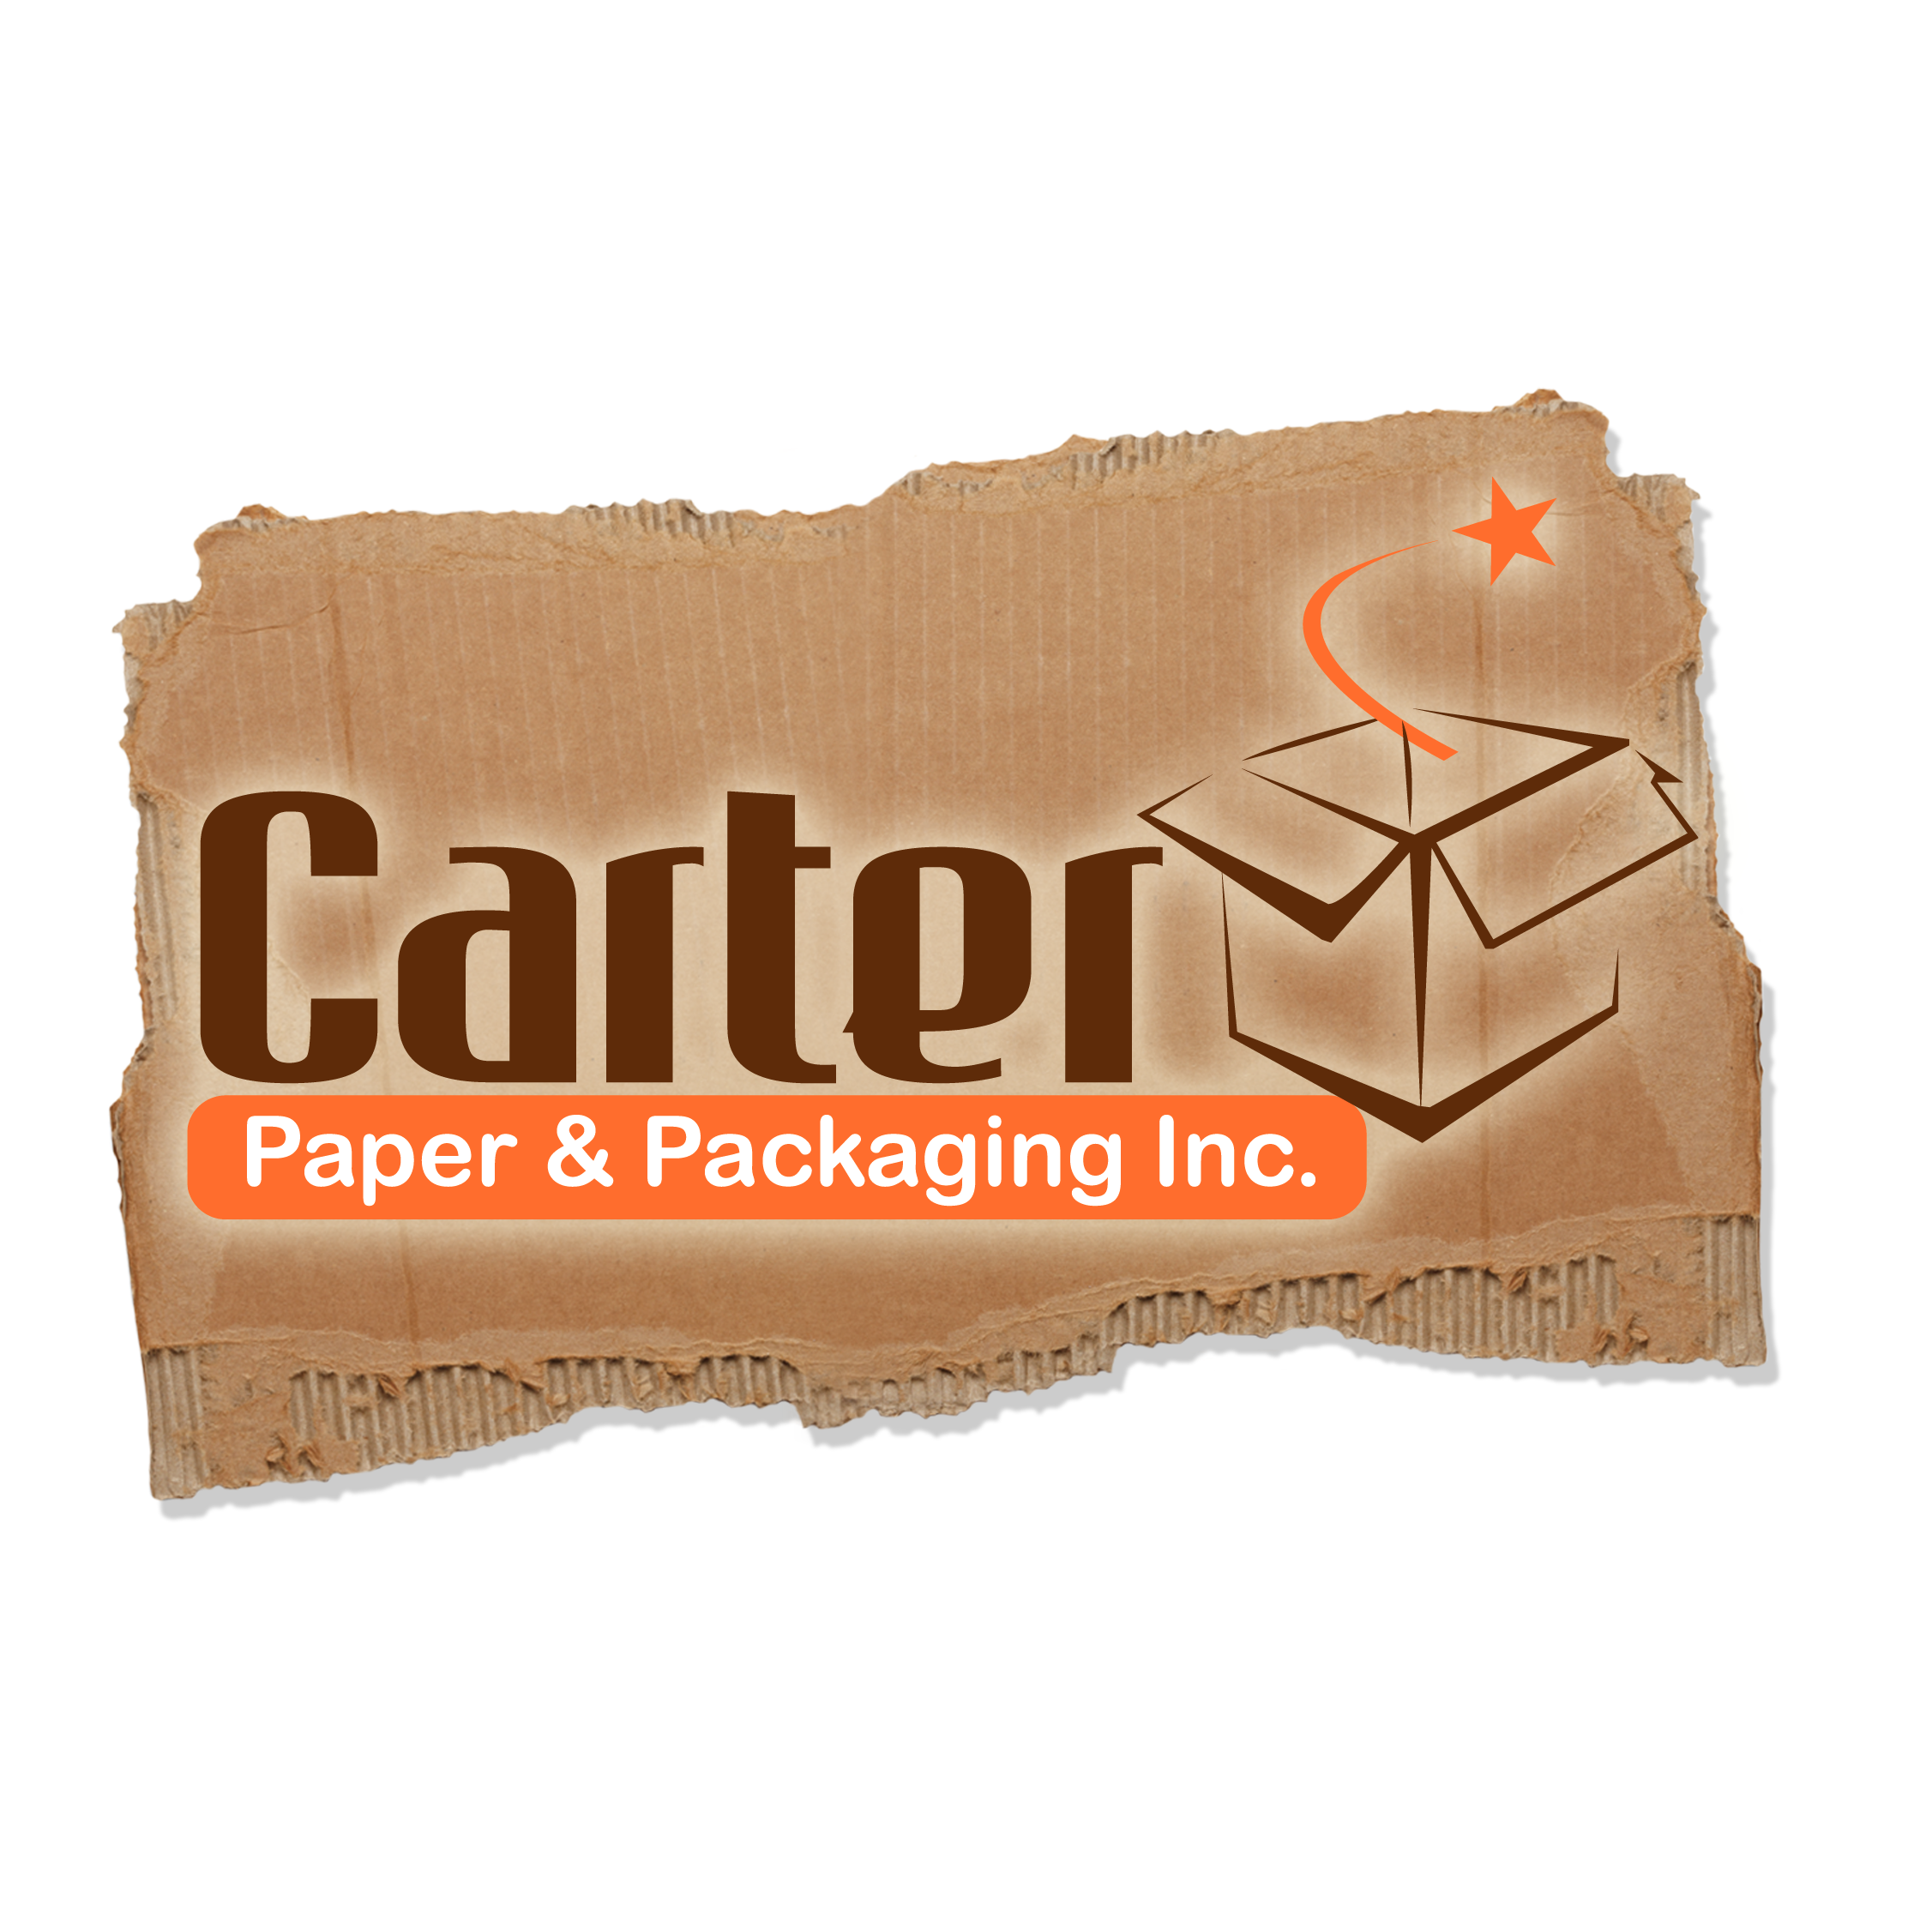 Carter Paper & Packaging Photo